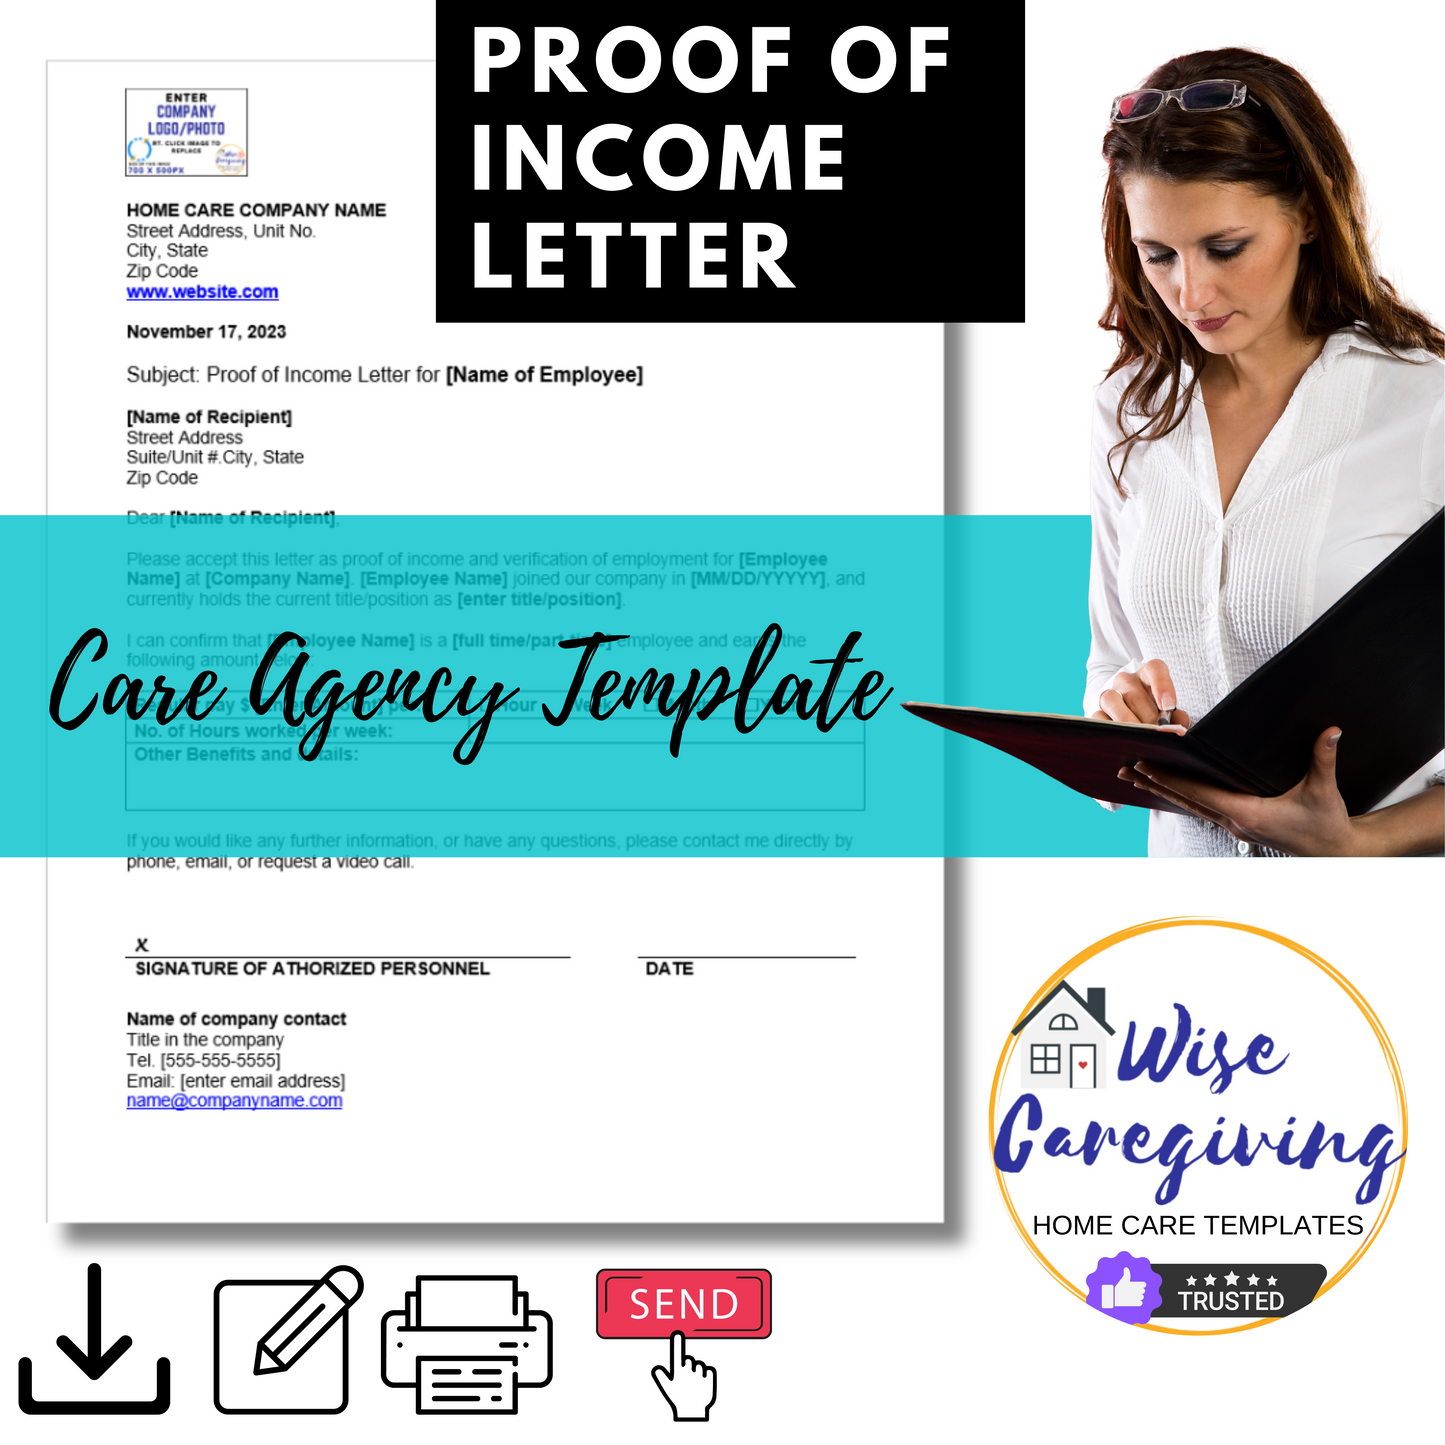 Proof of Income Letter Template for Home Care Employee